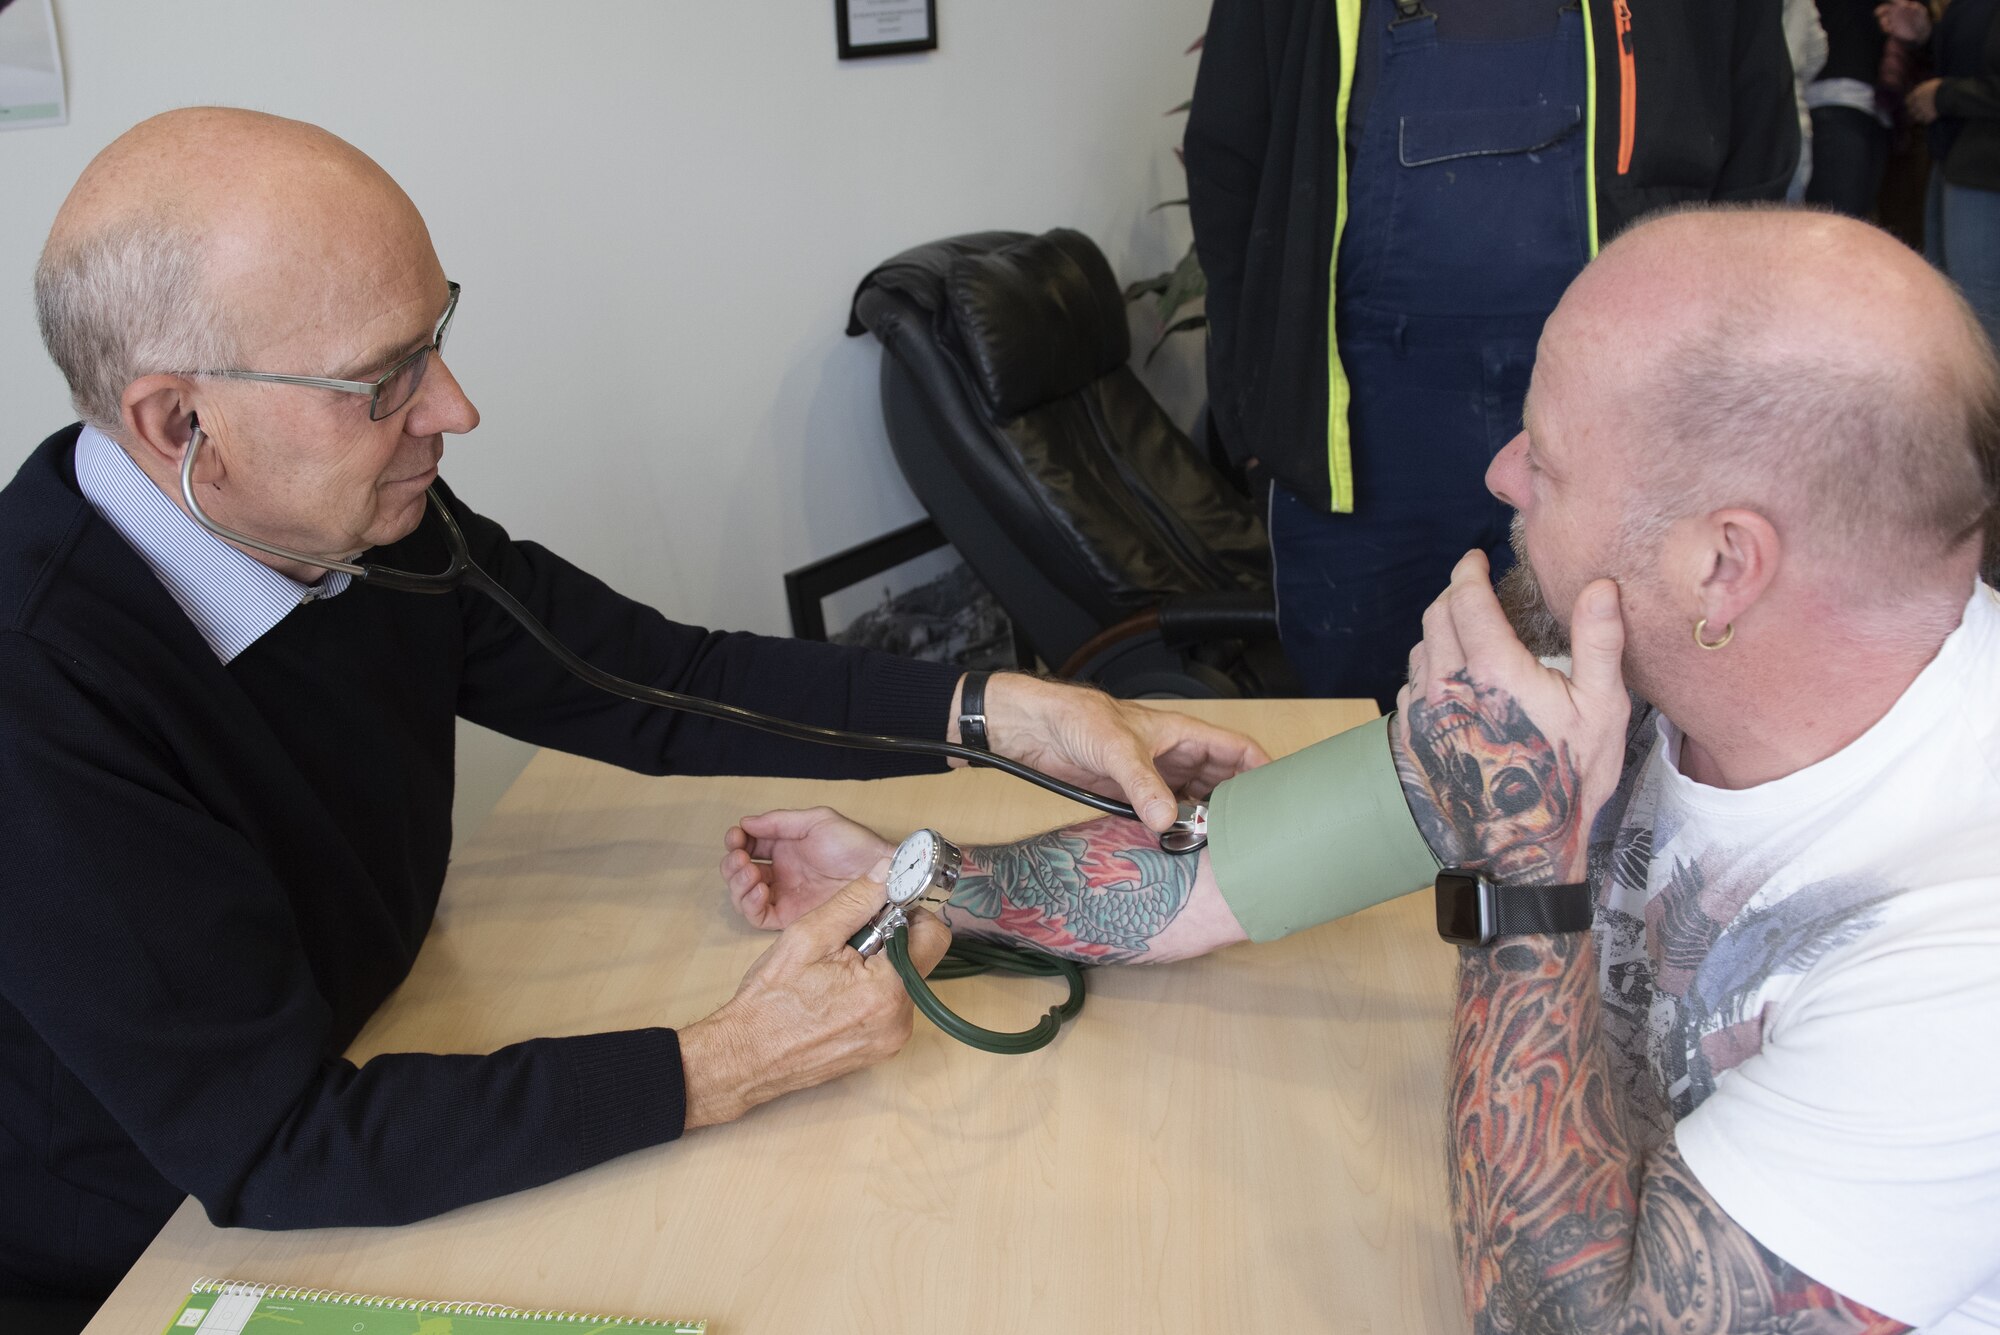 Gunter Willenborg, a local-national doctor of occupational health, left, takes the blood pressure of a health fair attendee at Spangdahlem Air Base, Germany, Sept. 24, 2019. Willenborg offered a free assessment to participants during the first local-national health fair. (U.S. Air Force photo by Airman 1st Class Alison Stewart)